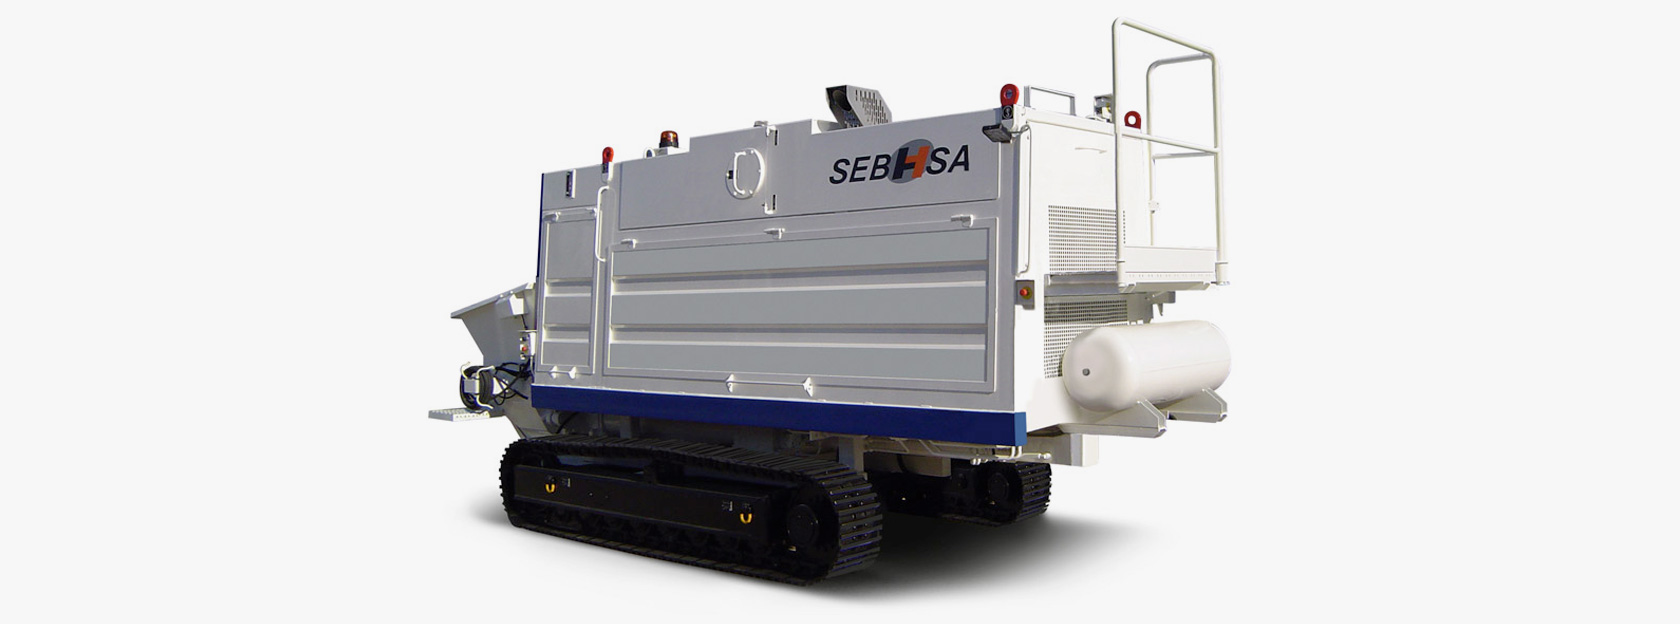 The SEBHSA BD-3117.OR tracked pump is configured to achieve maximum productivity from its highly efficient, low emission engine.